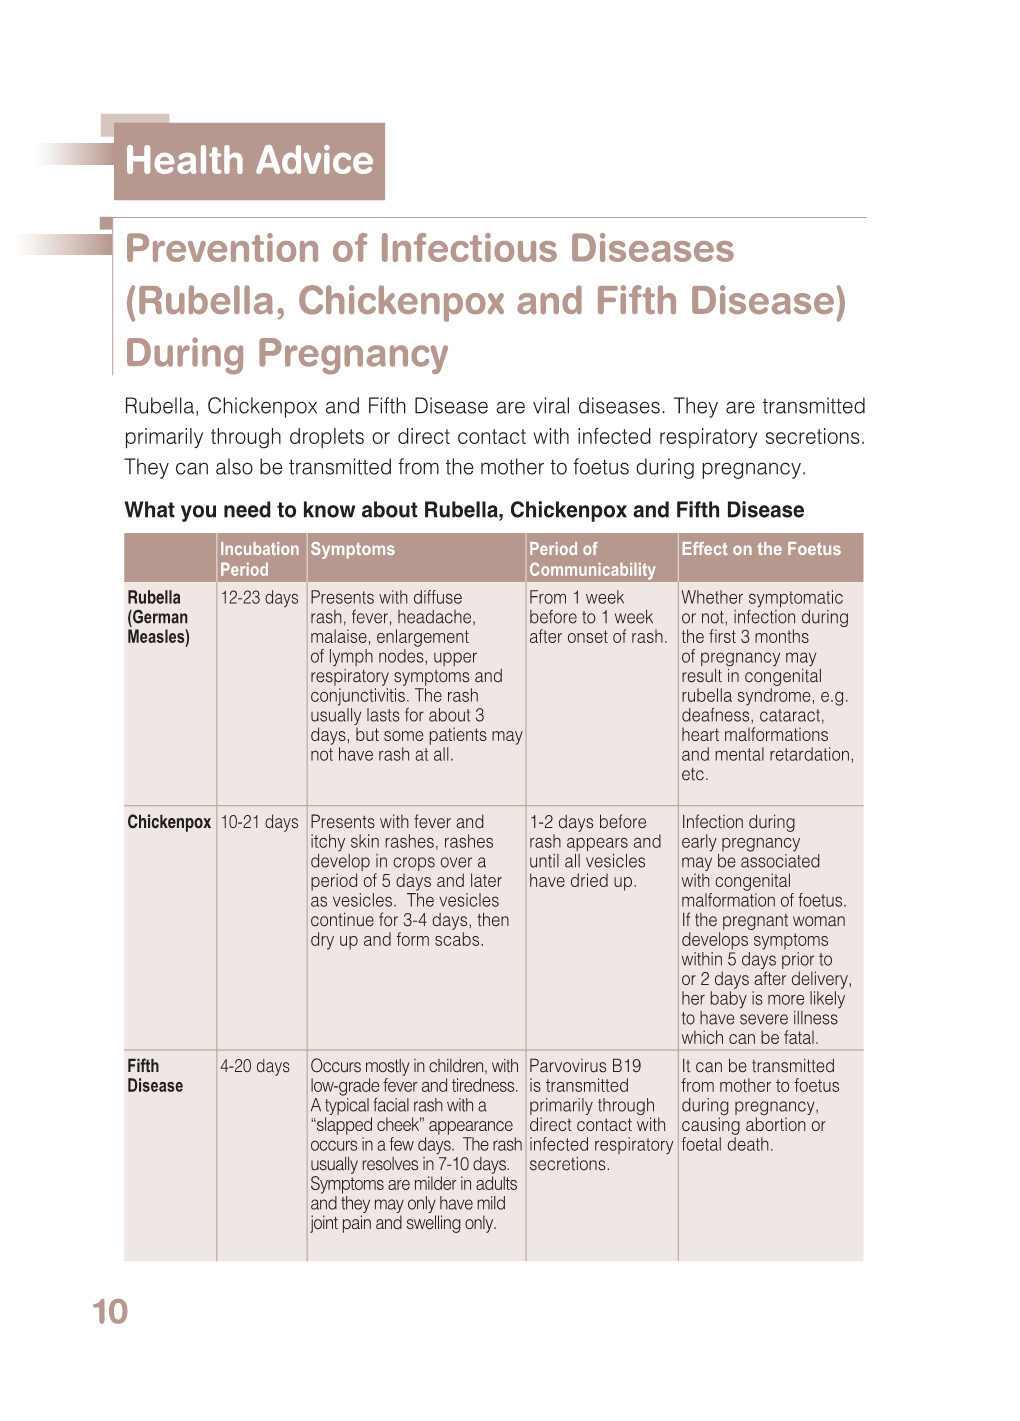 Prevention of Infectious Diseases (Rubella, Chickenpox and Fifth Disease) During Pregnancy Health Advice